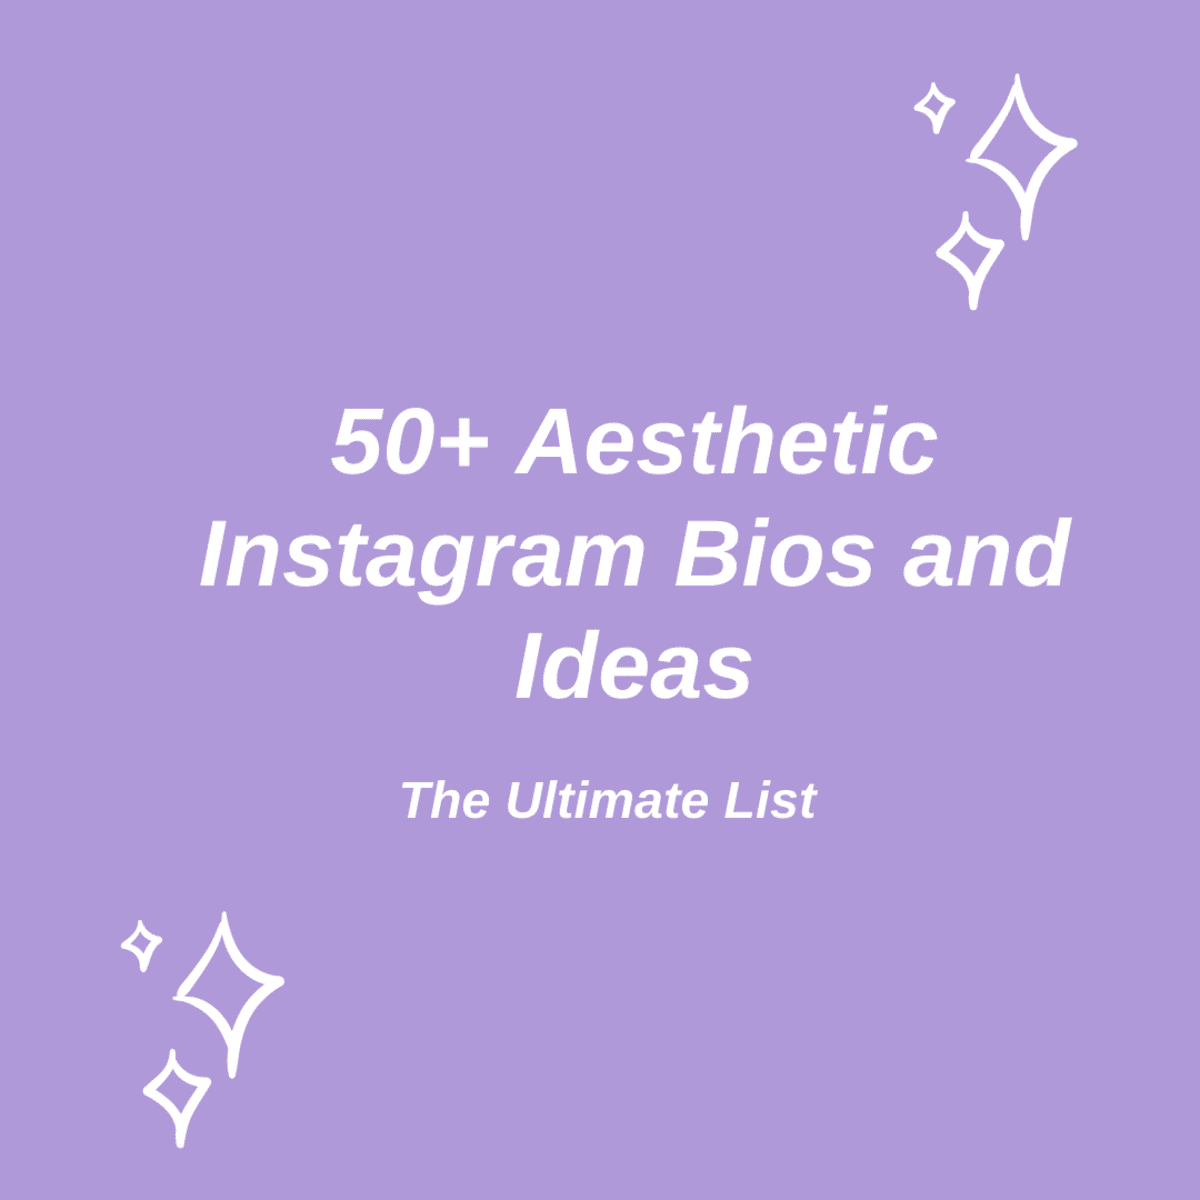 50+ Aesthetic Instagram Bios and Ideas: The Ultimate List - TurboFuture